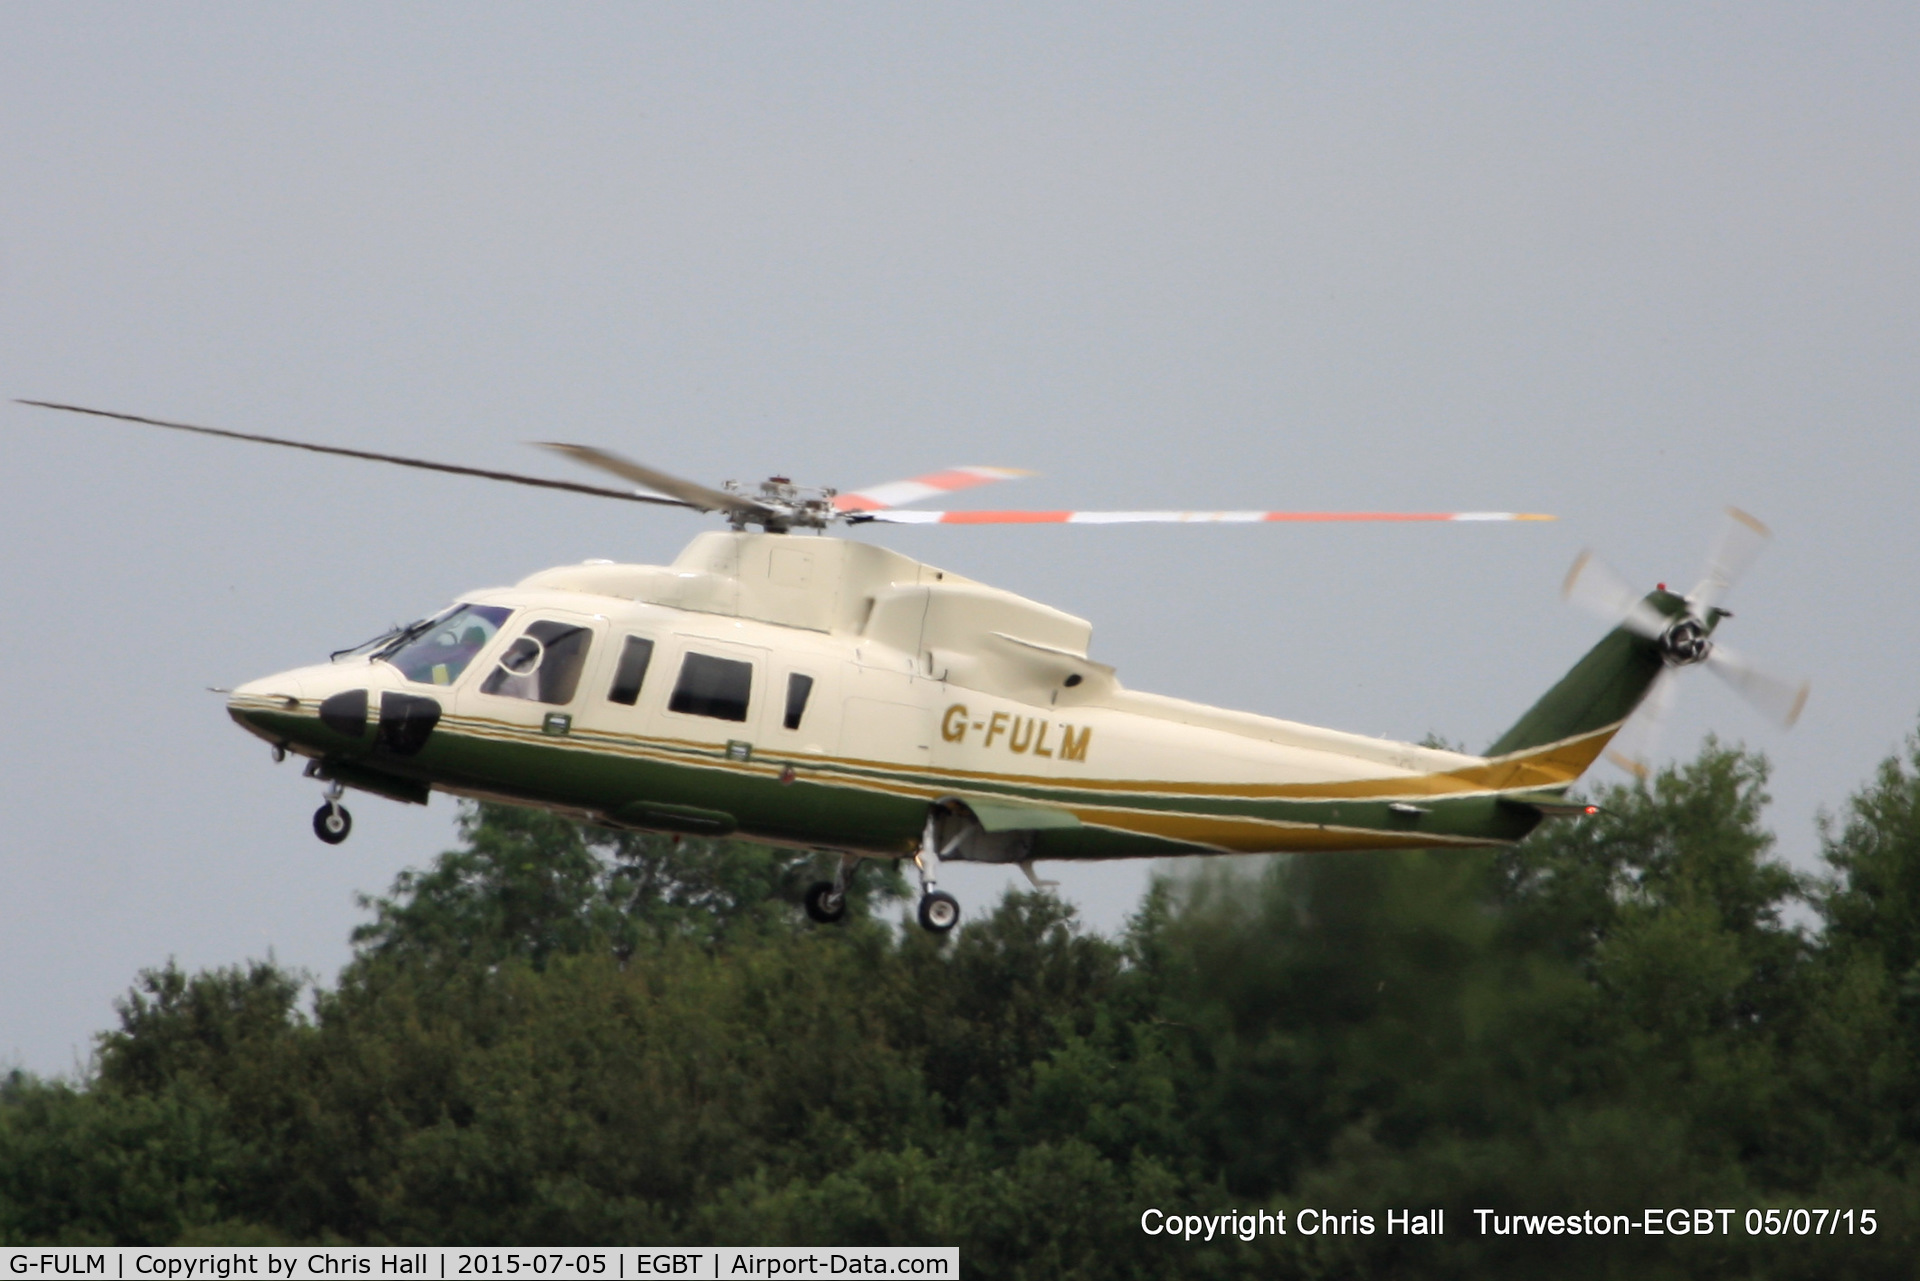 G-FULM, 2005 Sikorsky S-76C C/N 760583, ferrying race fans to the British F1 Grand Prix at Silverstone